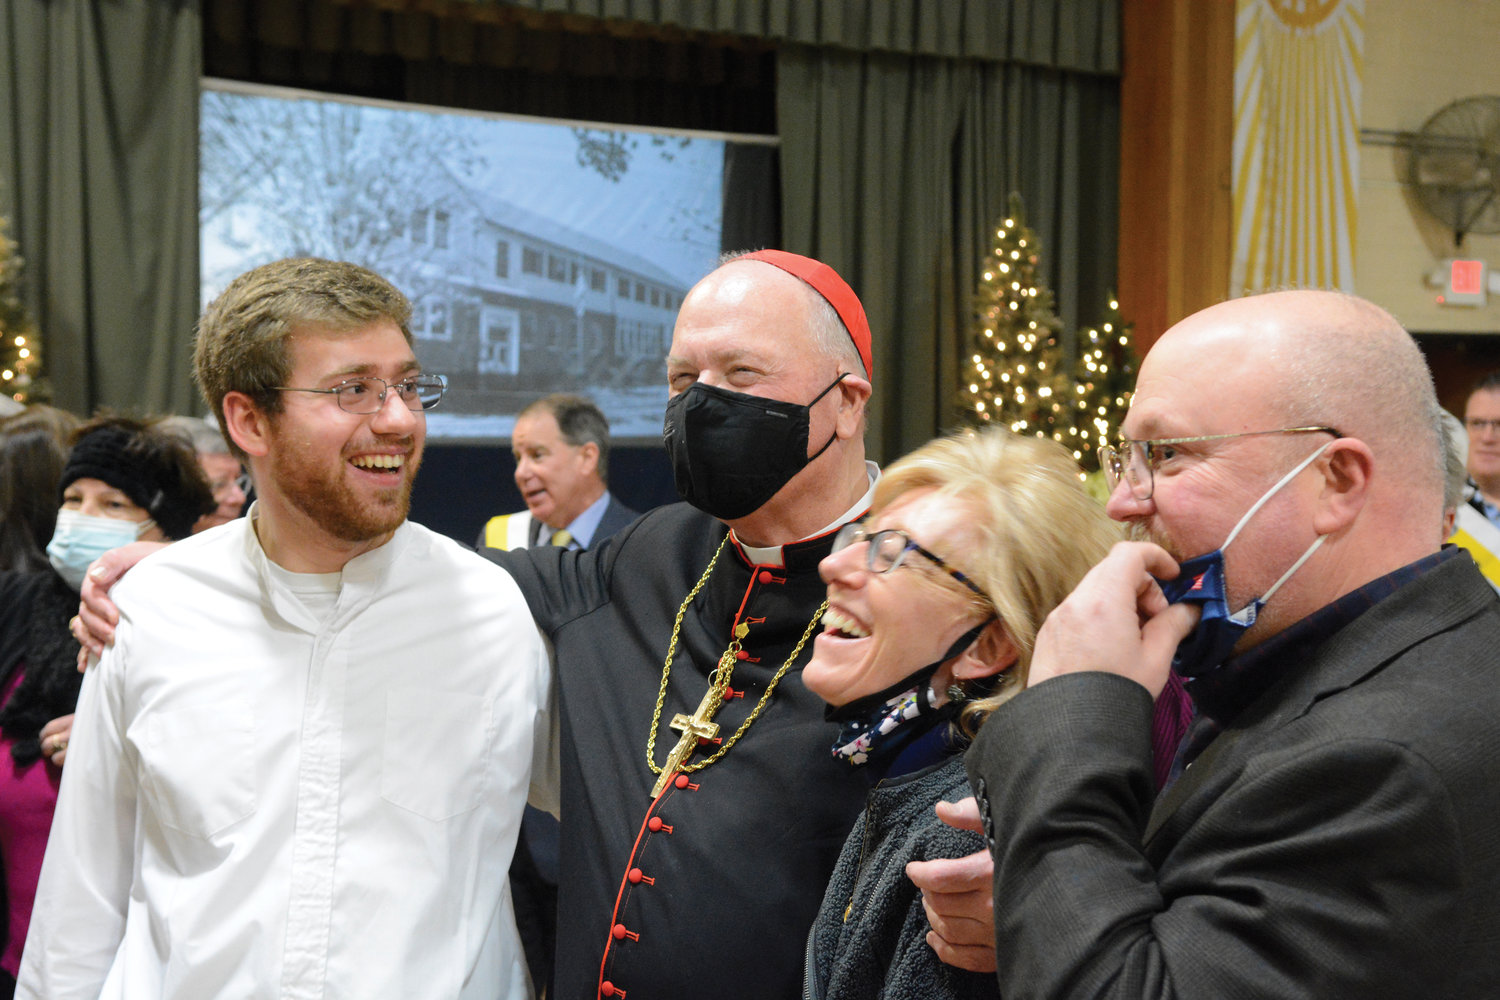 Altar server Jack Kristensen, left, a fourth-year college seminarian at The Catholic University of America in Washington, D.C., and his parents, Janine and Christian, meet Cardinal Dolan at a reception in the parish center after Mass.